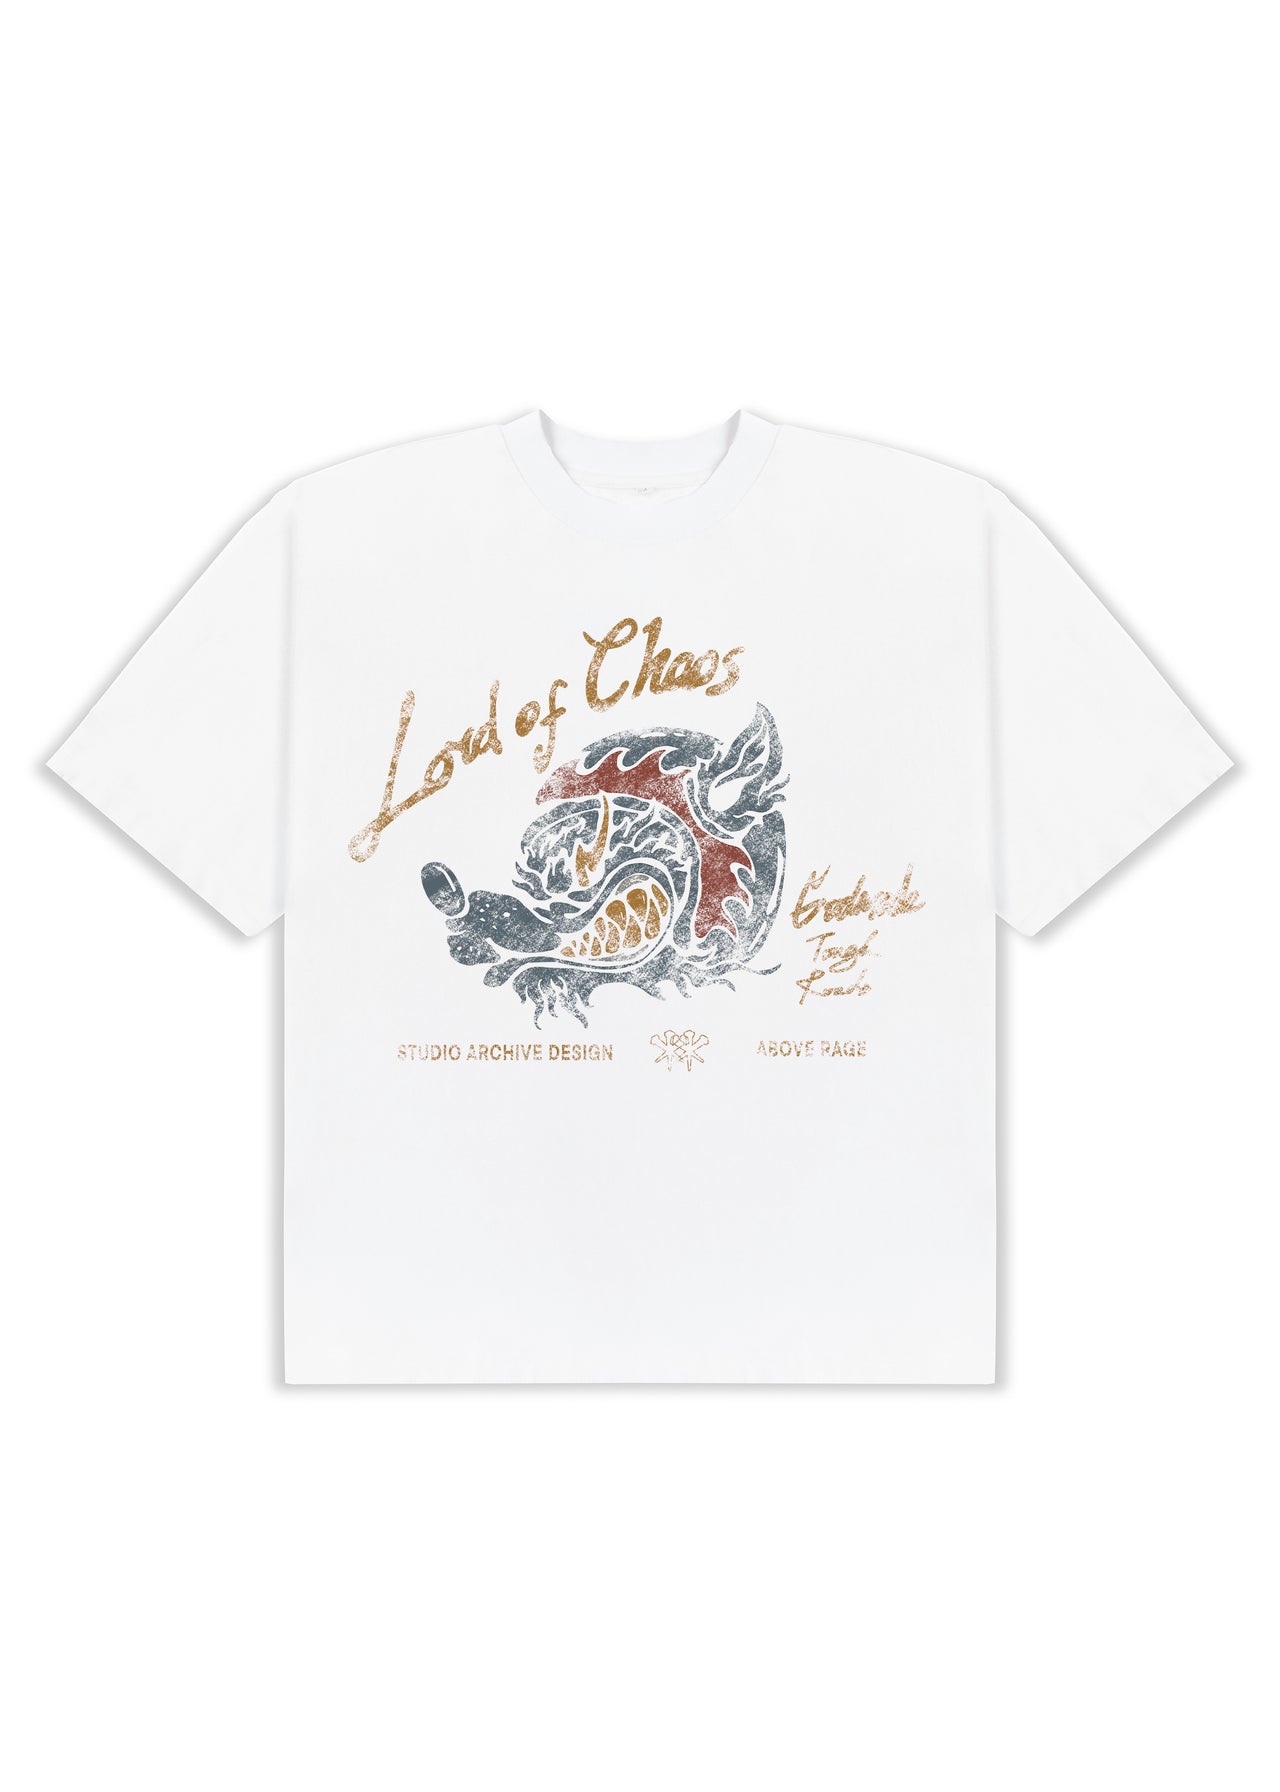 LORD OF CHAOS - WHITE T-SHIRT